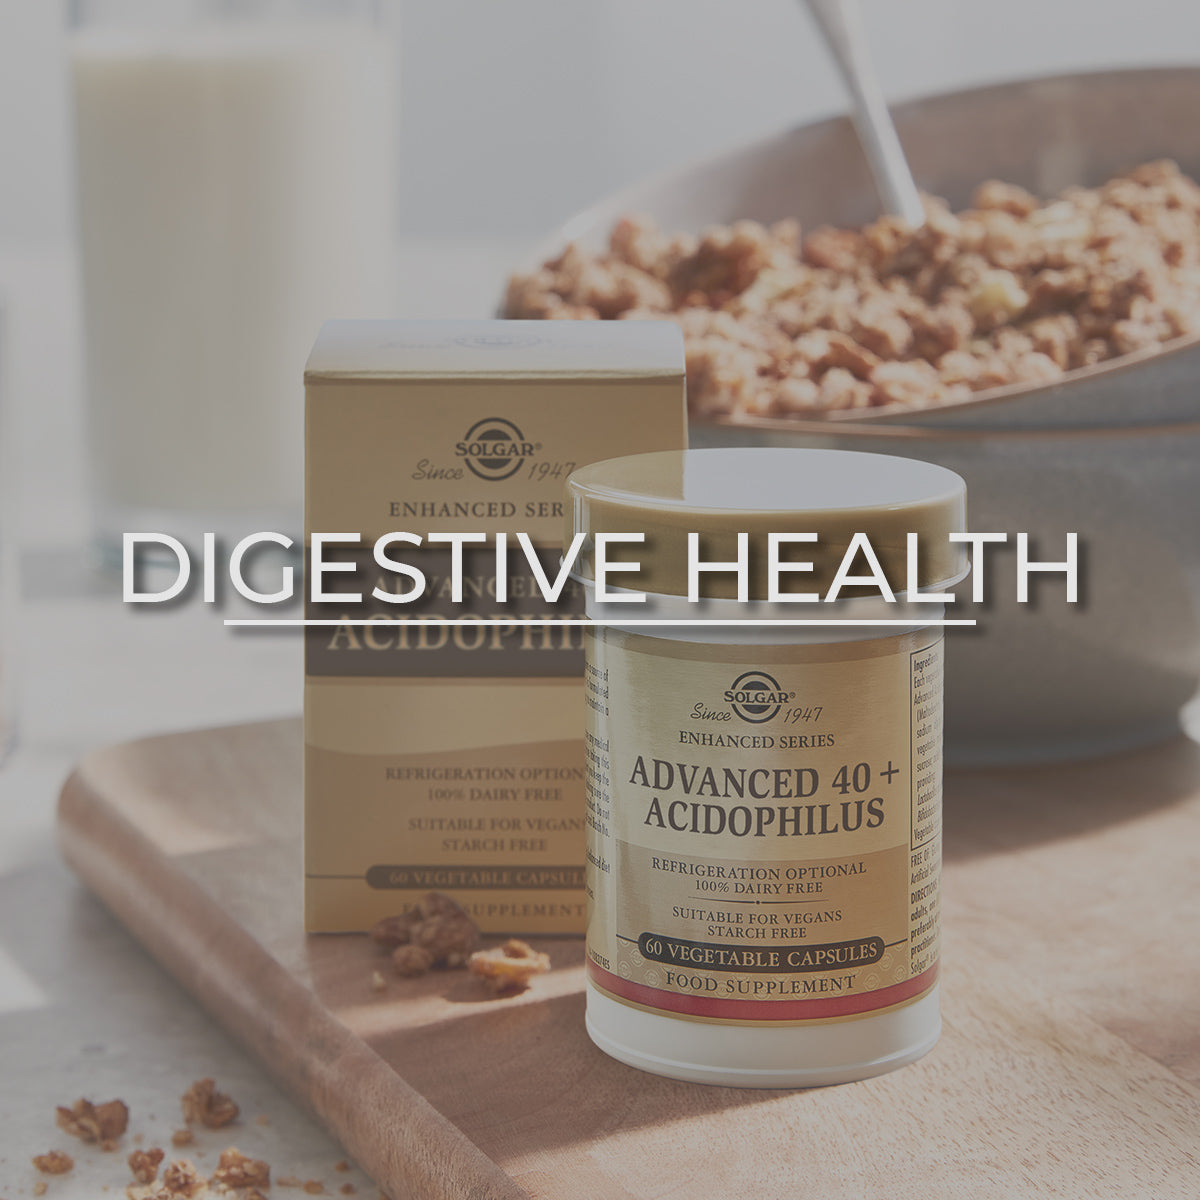 Click here to browse by Digestive Health category